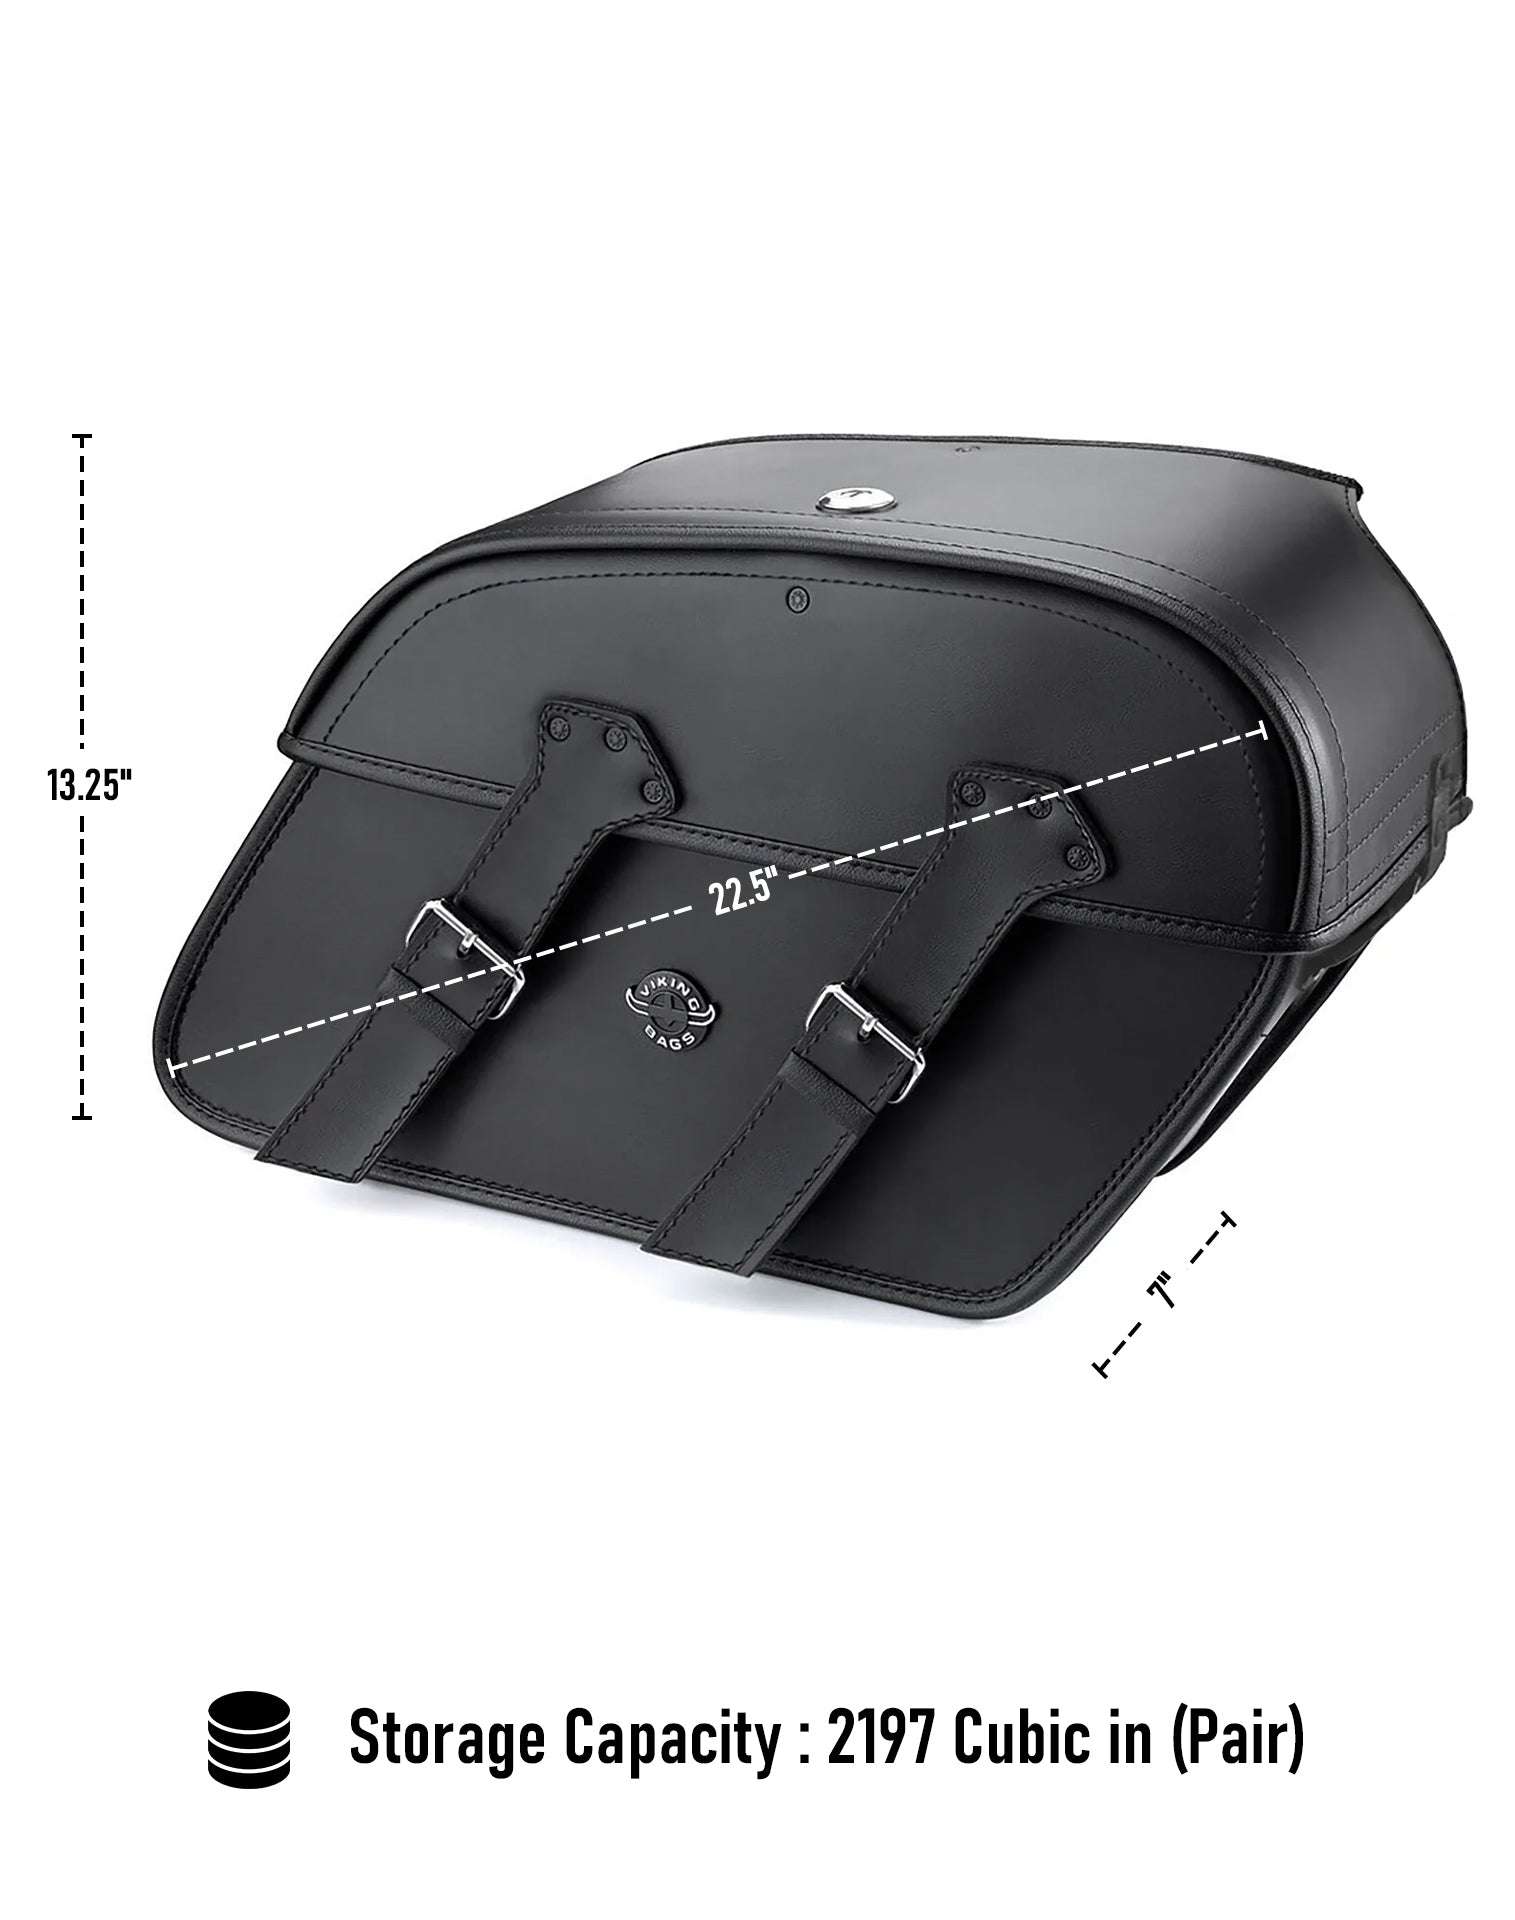 Viking Raven Extra Large Shock Cut Out Leather Motorcycle Saddlebags For Harley Street 500 Can Store Your Ridings Gears